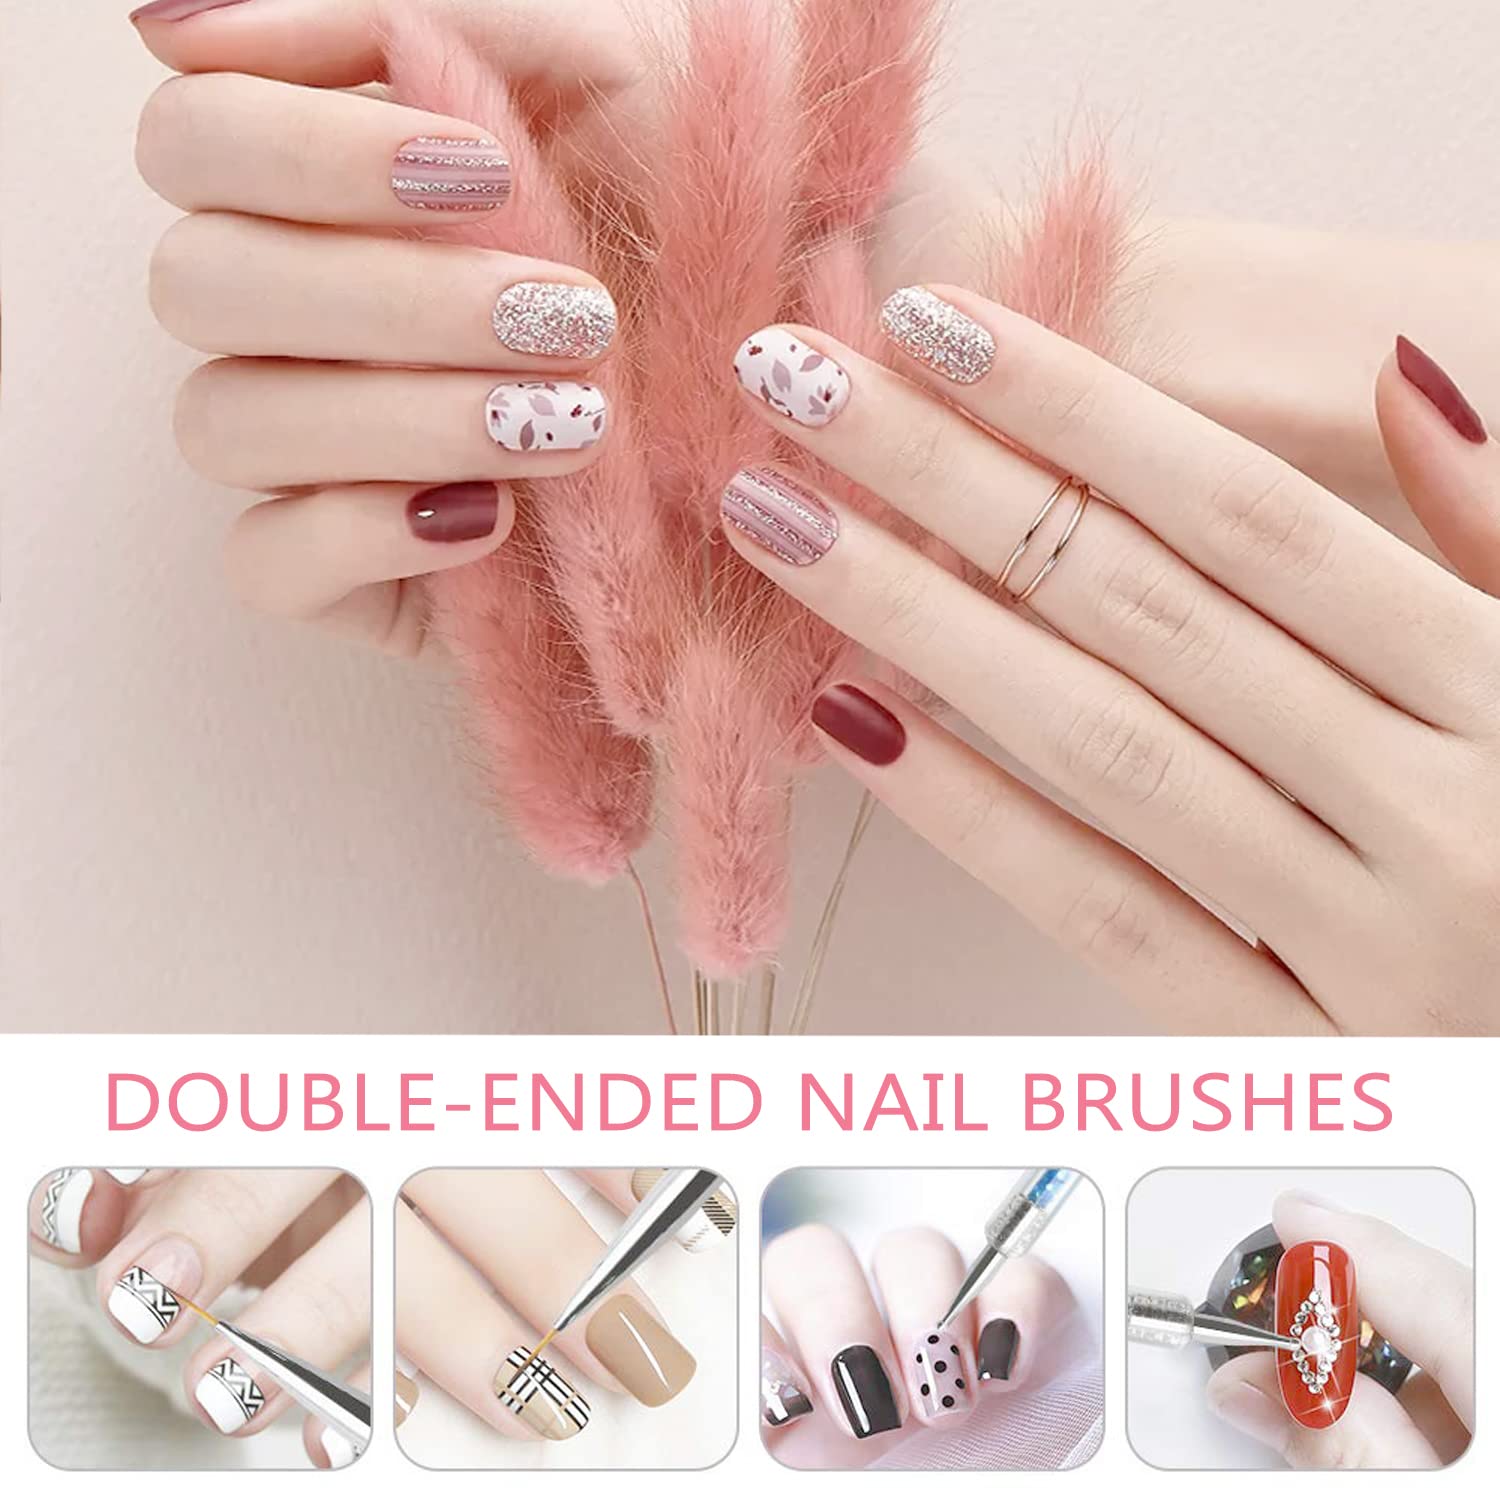 How to choose nail tools? These tips will easily teach you how to use tools